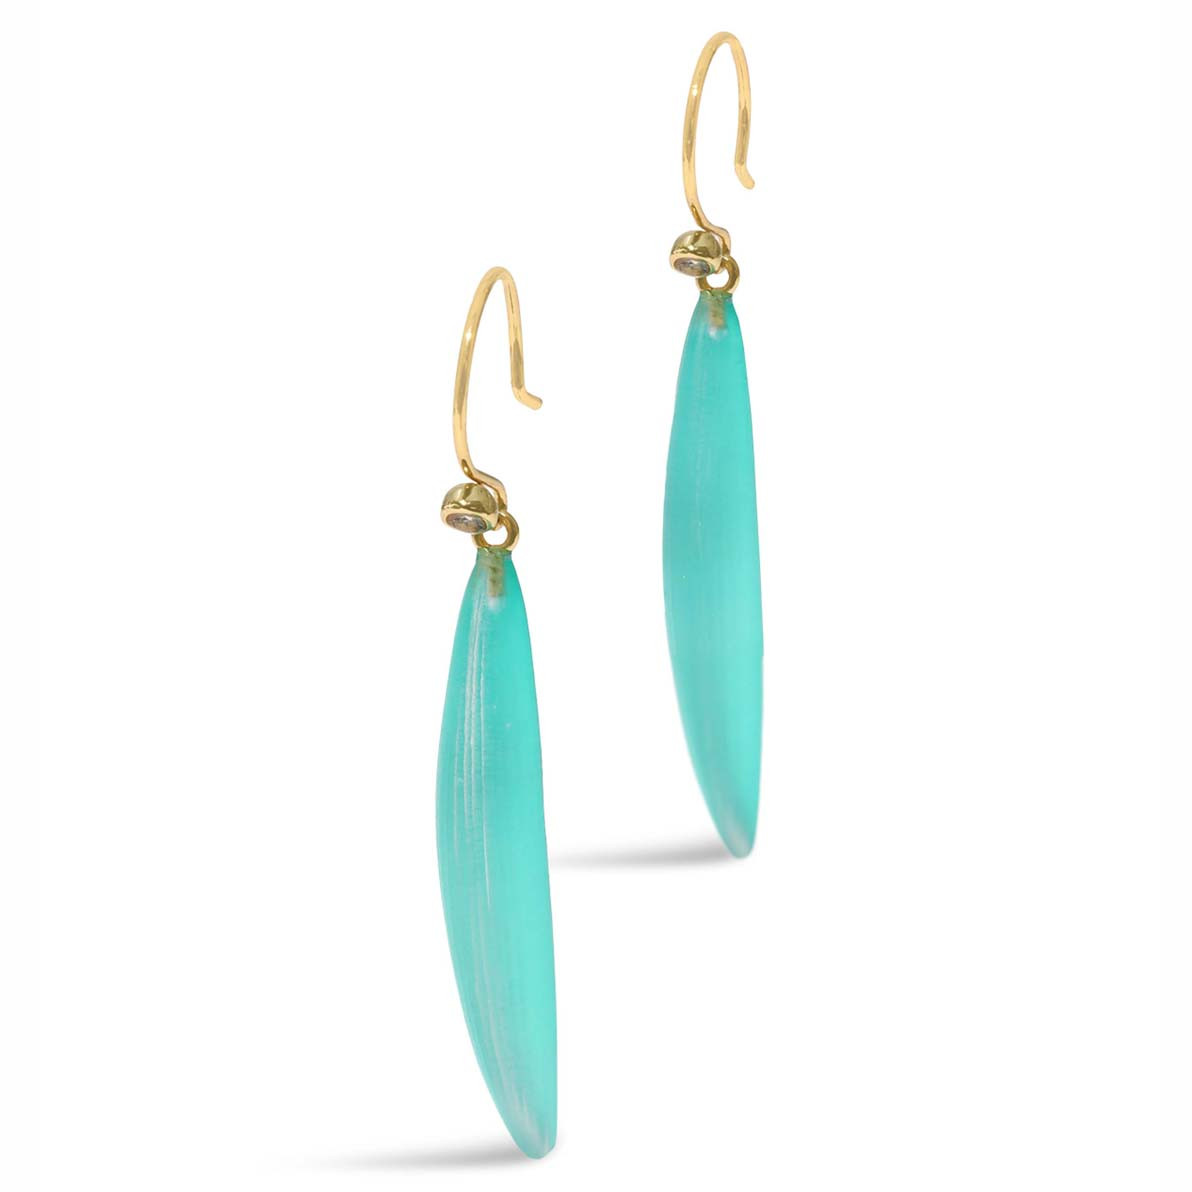 Blue Lucite Sliver Drop Earrings, Alexis Bittar, tomfoolery